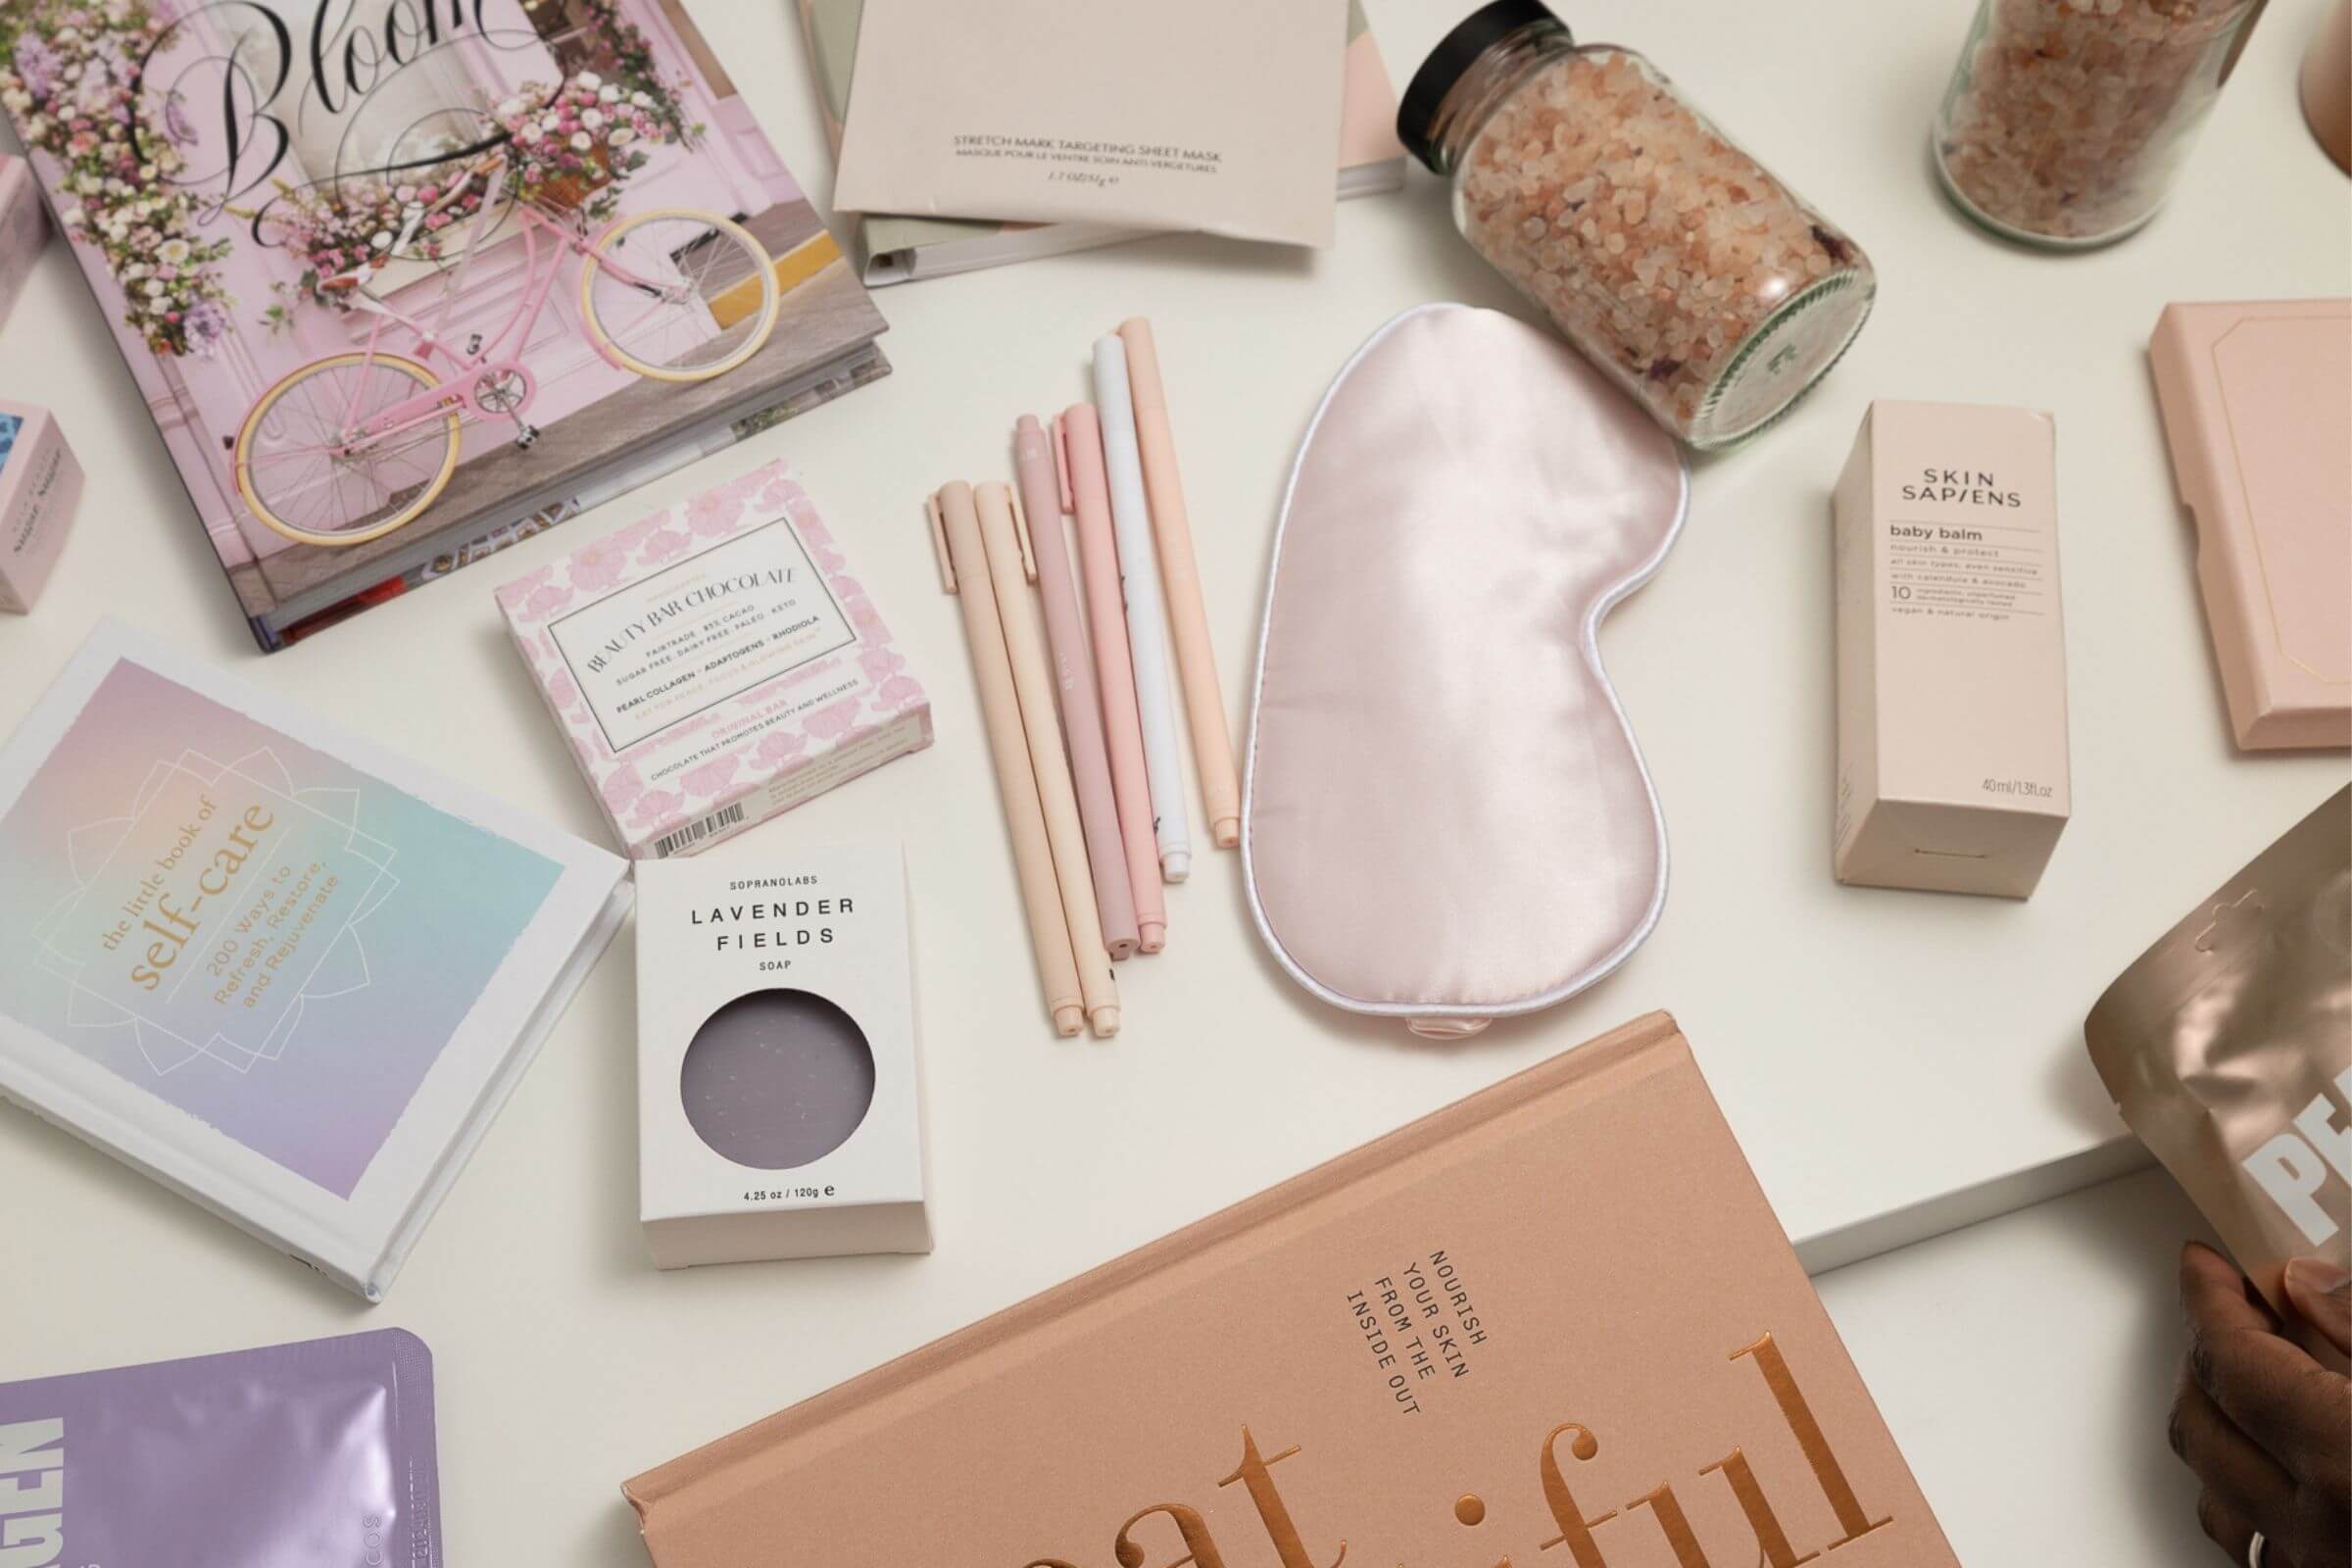 How To Build A Self Care Kit - From You, To You – SHOPBOXD